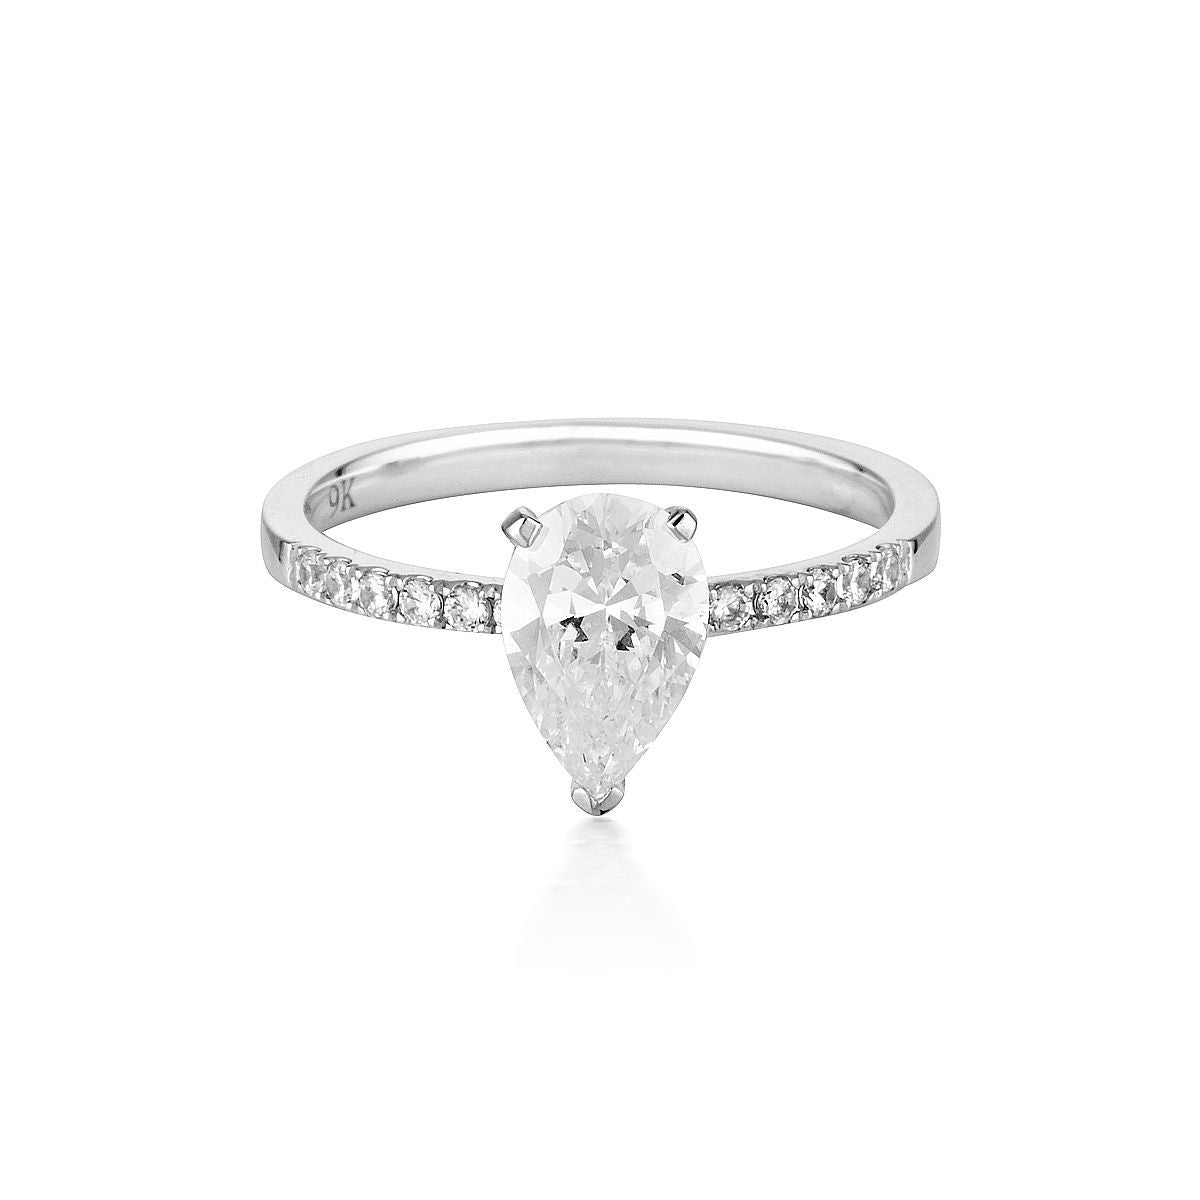 Georgini - Pear Cut And Round Brilliant 1.5Ct Cubic Zirconia Engagement Ring In 9Ct White Gold